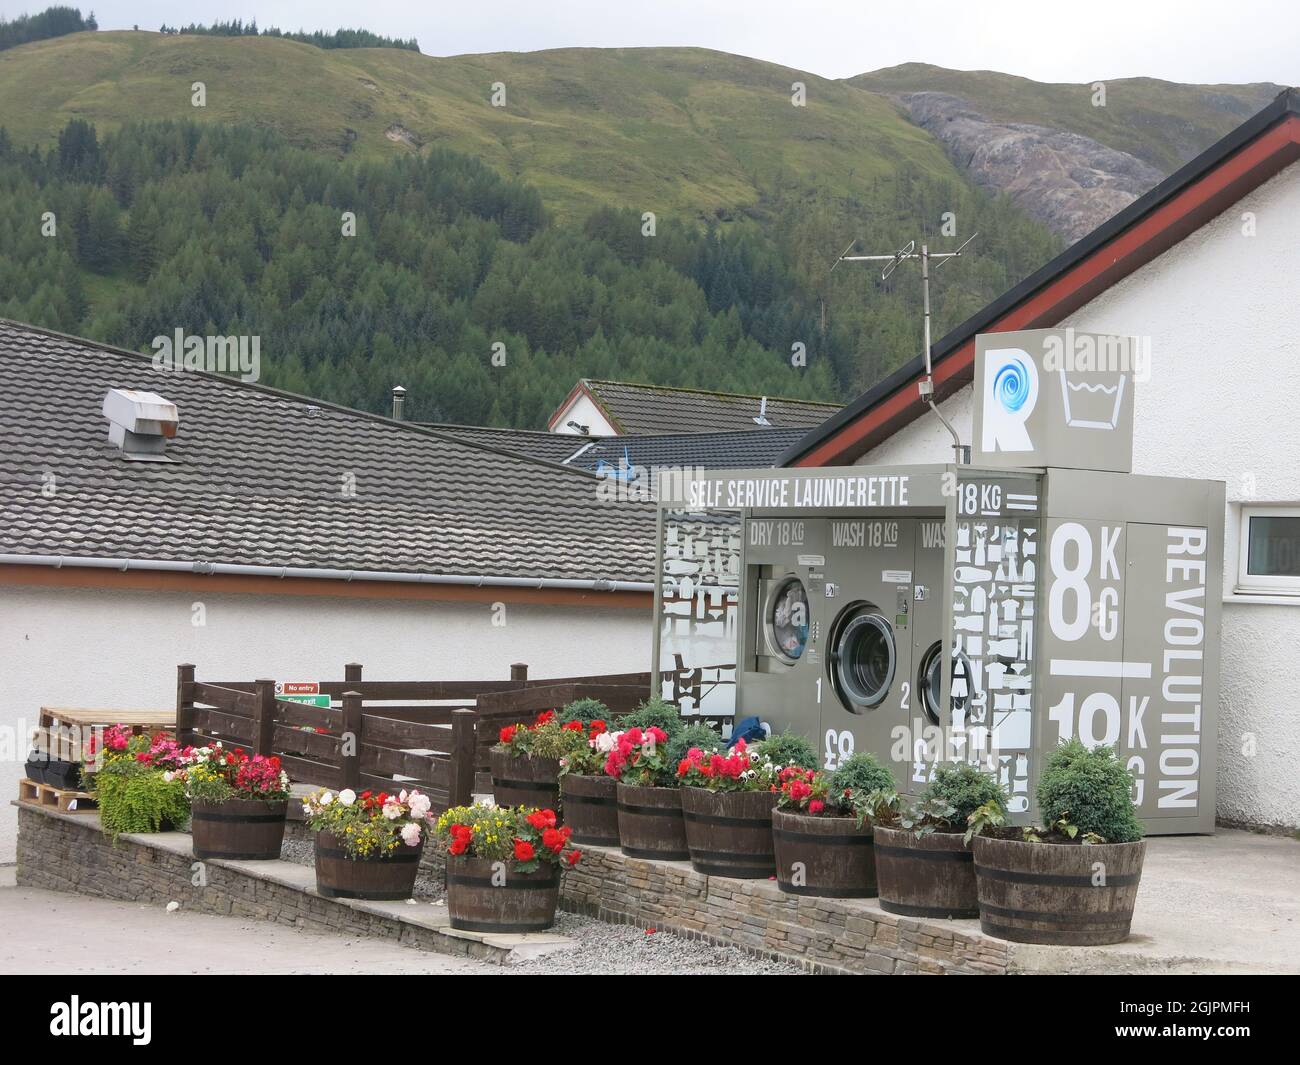 The Green Welly Stop on the A82 is a well-known stopping-off point for petrol, shopping, refreshments and traveller services such as a launderette. Stock Photo